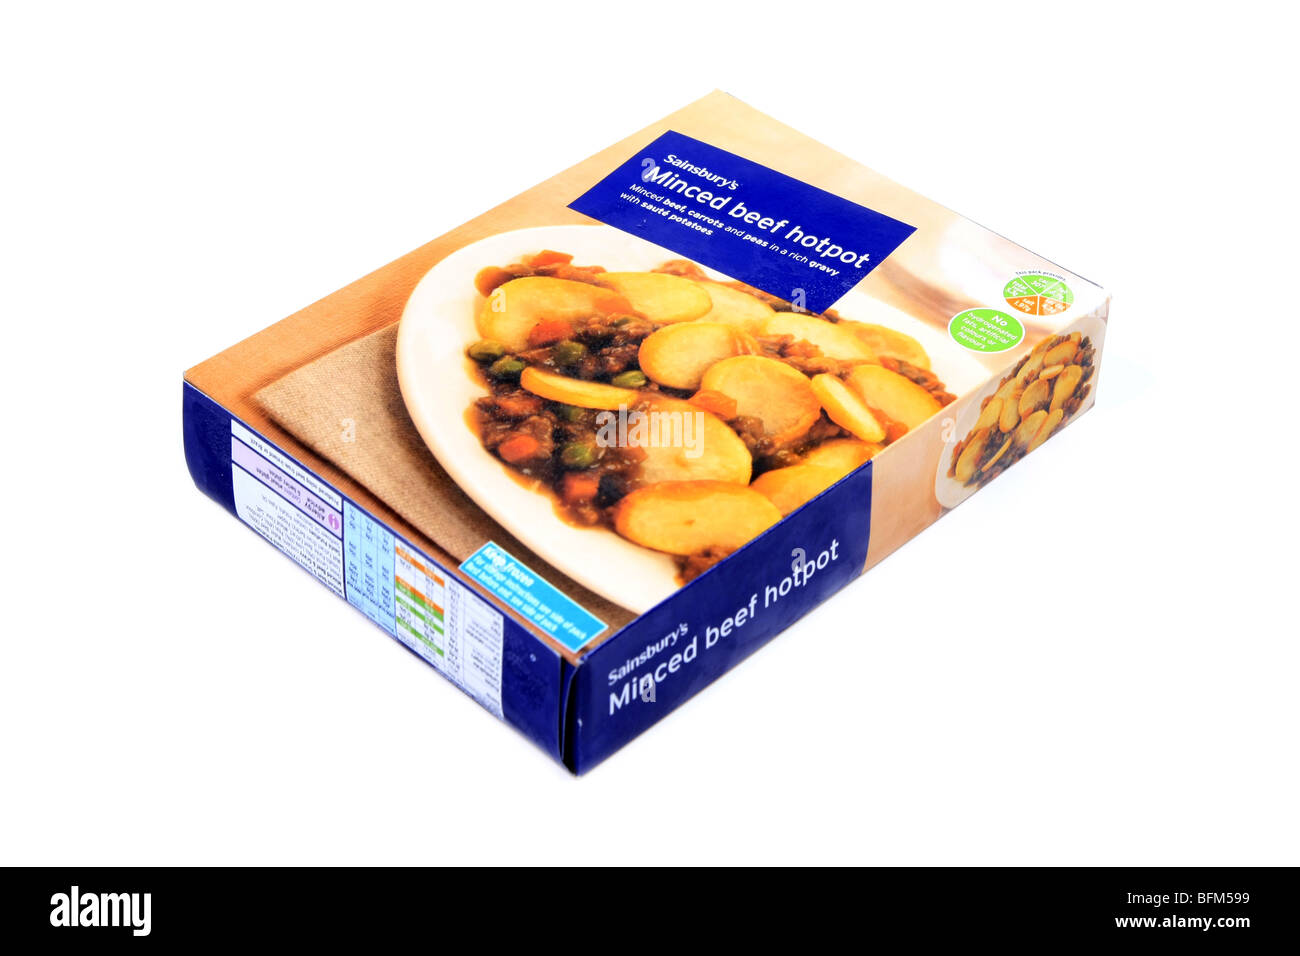 Frozen Minced Beef Hot Pot Ready Dinner cardboard packaging set against a white background Stock Photo